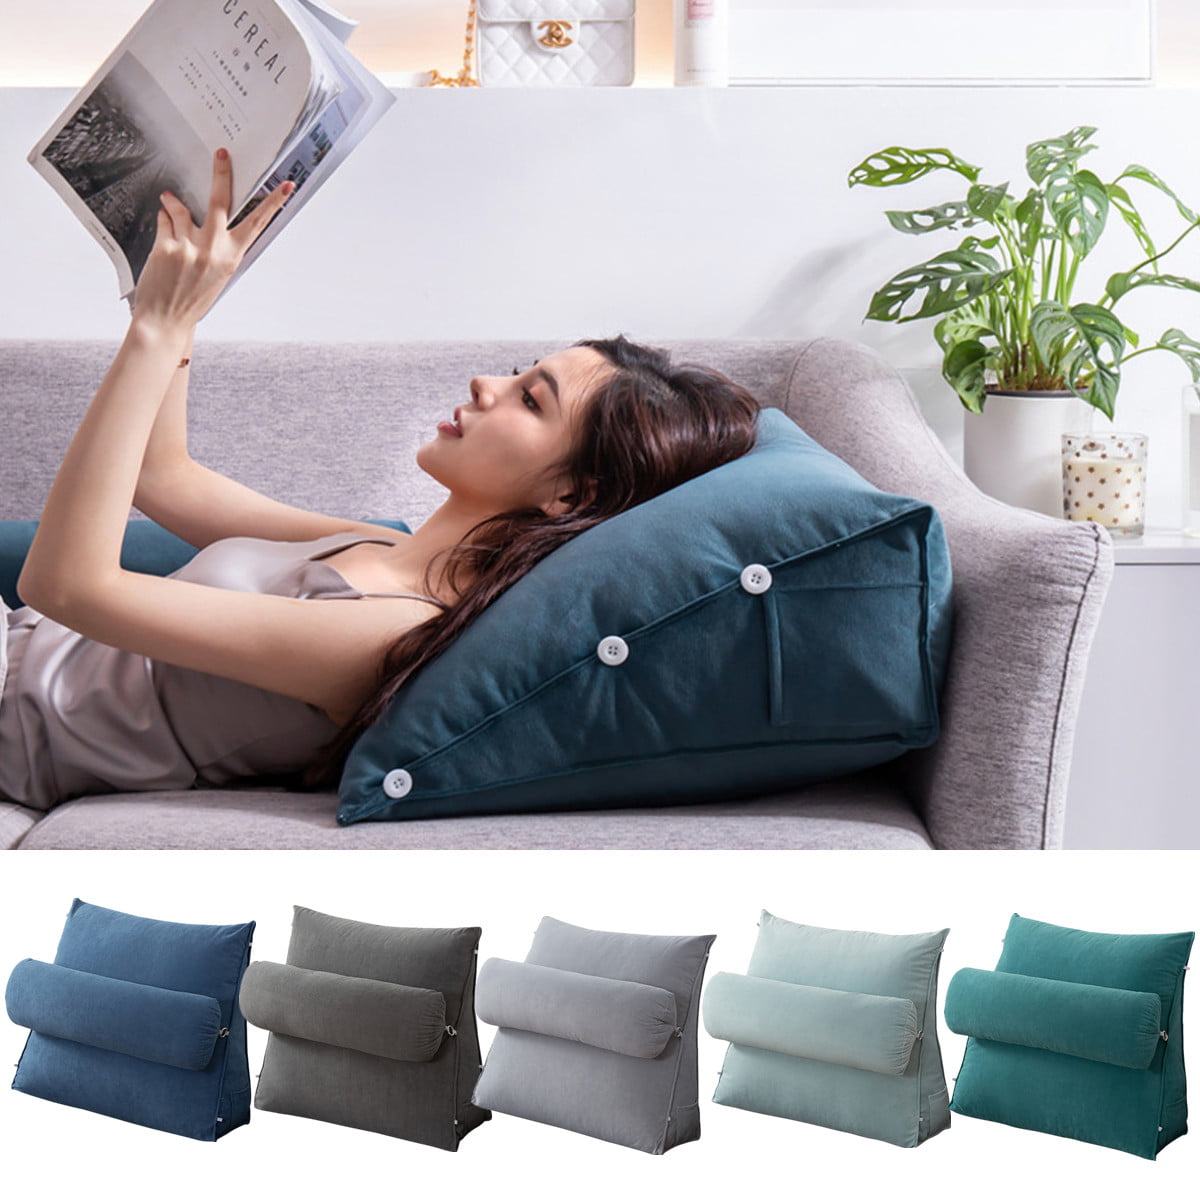 Three Gear Adjustable Back Wedge Cushion Pillow 17.7x17.7x7.87in Sofa Bed  Office Chair Rest Cushion Waist Neck Support Pillow with Small Pockets 